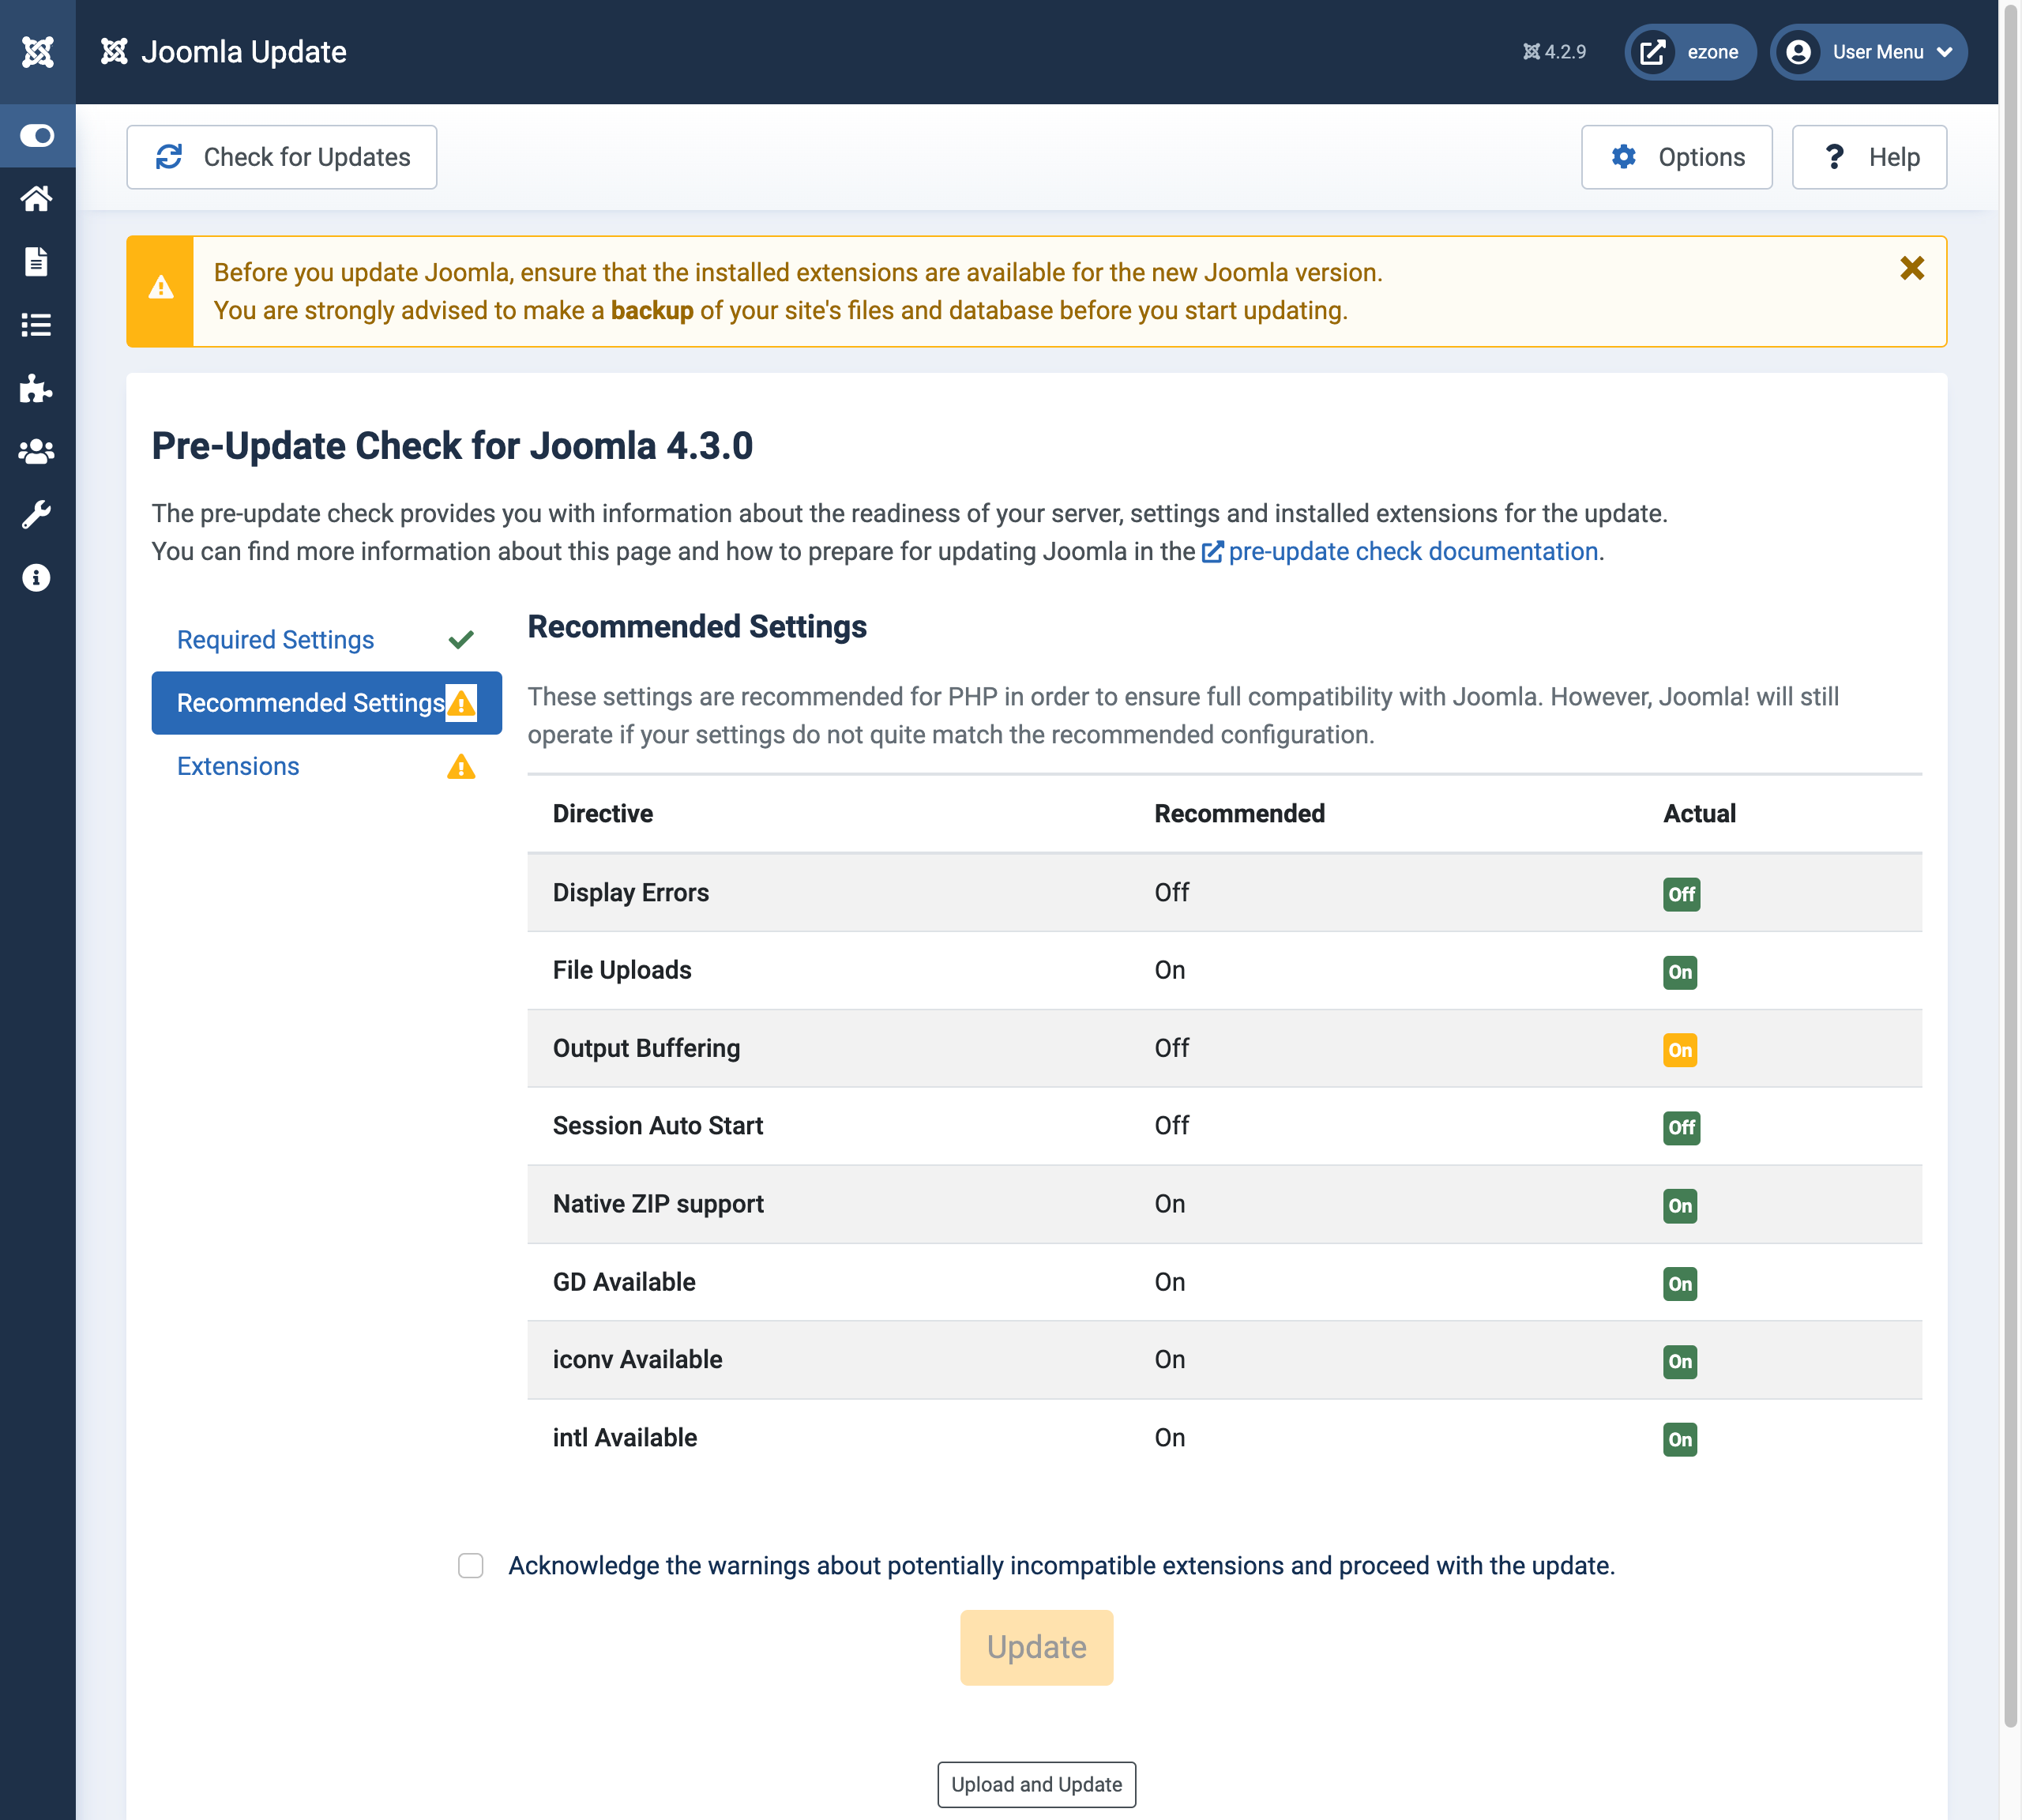 Pre-Update Recommended Requirements check for Joomla 4